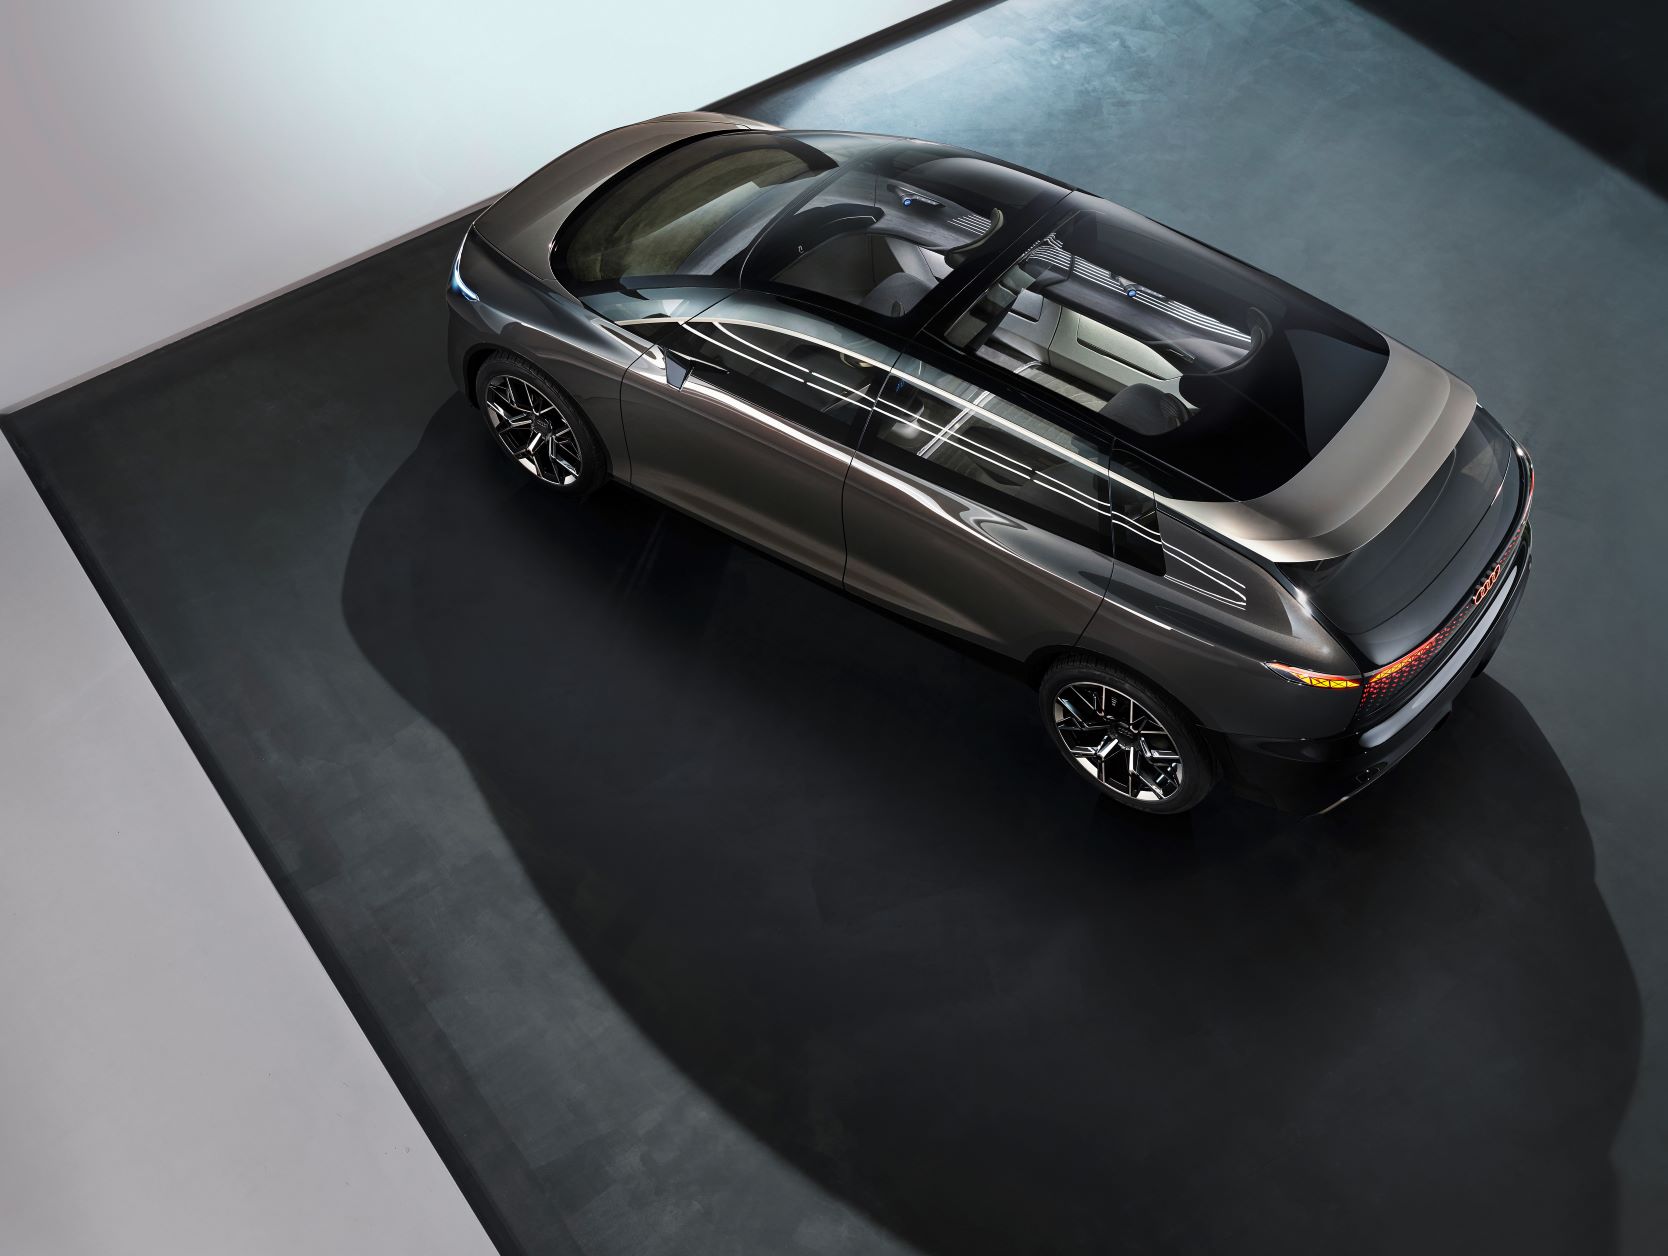 Bird's eye view of the Audi Urbansphere concept